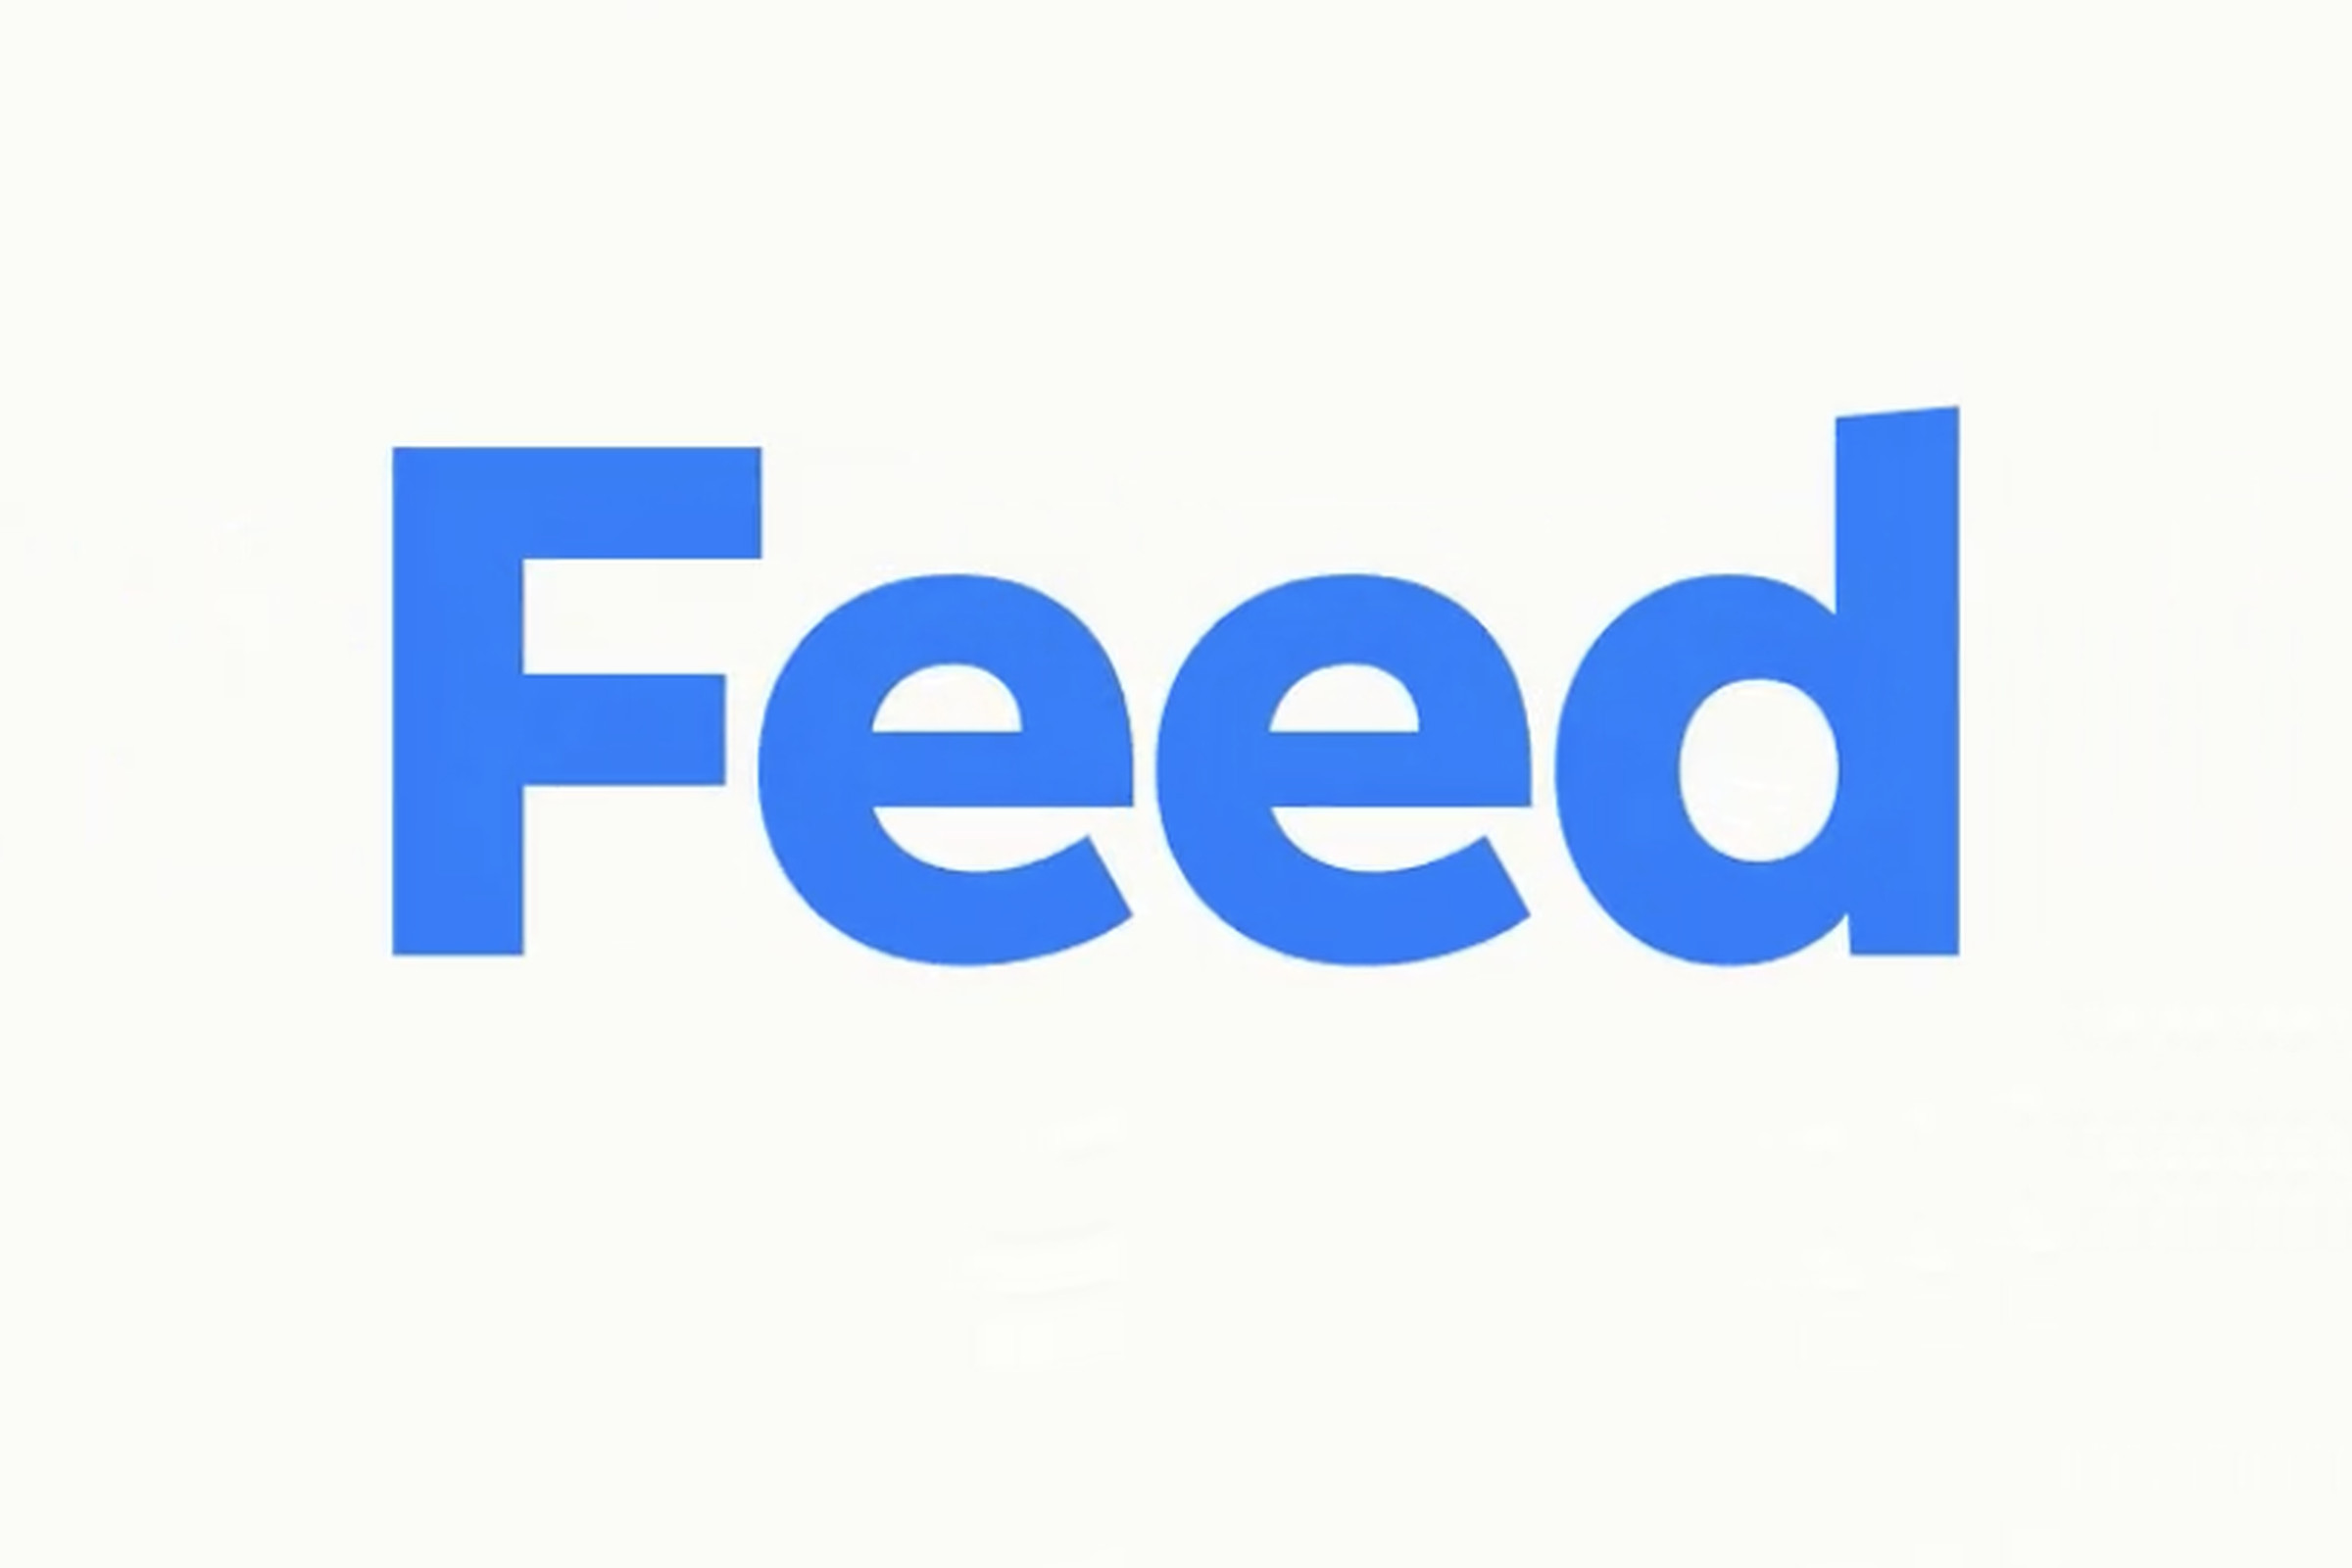 The News Feed will now just be the Feed.